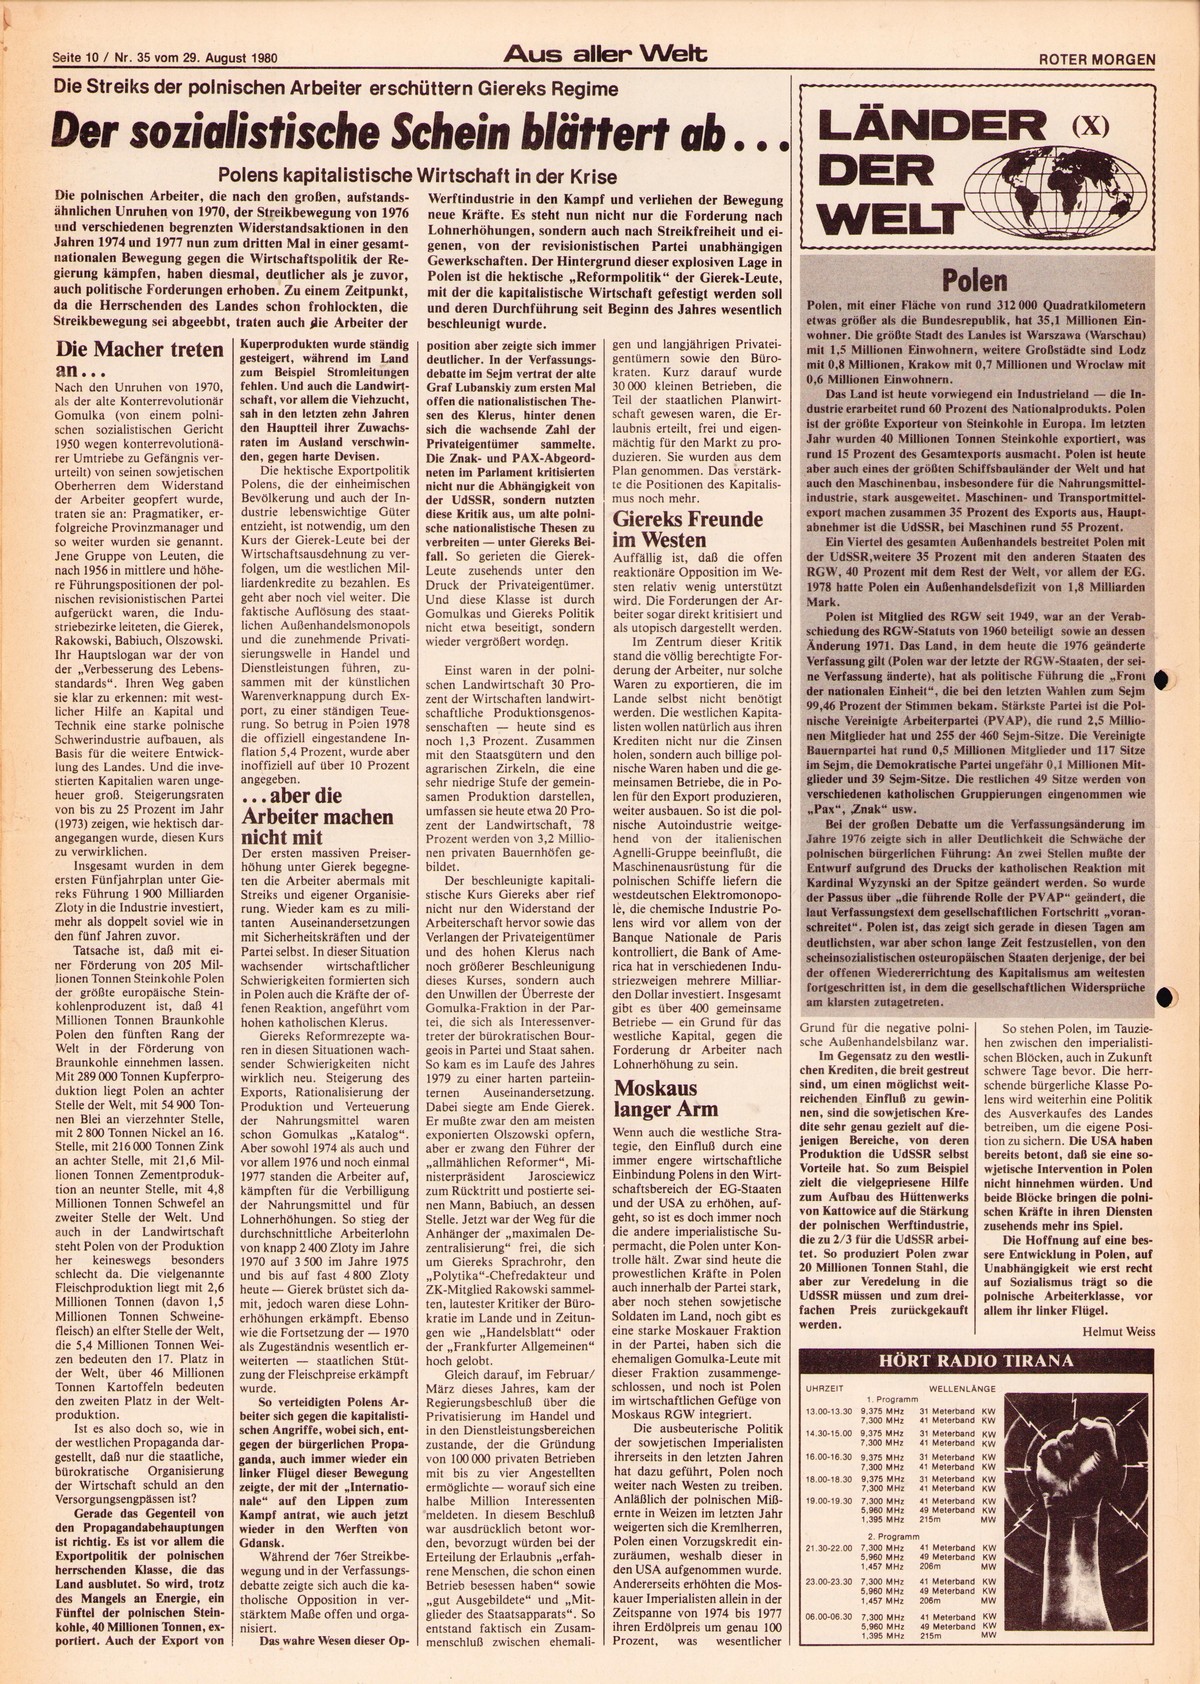 Roter Morgen, 14. Jg., 29. August 1980, Nr. 35, Seite 10